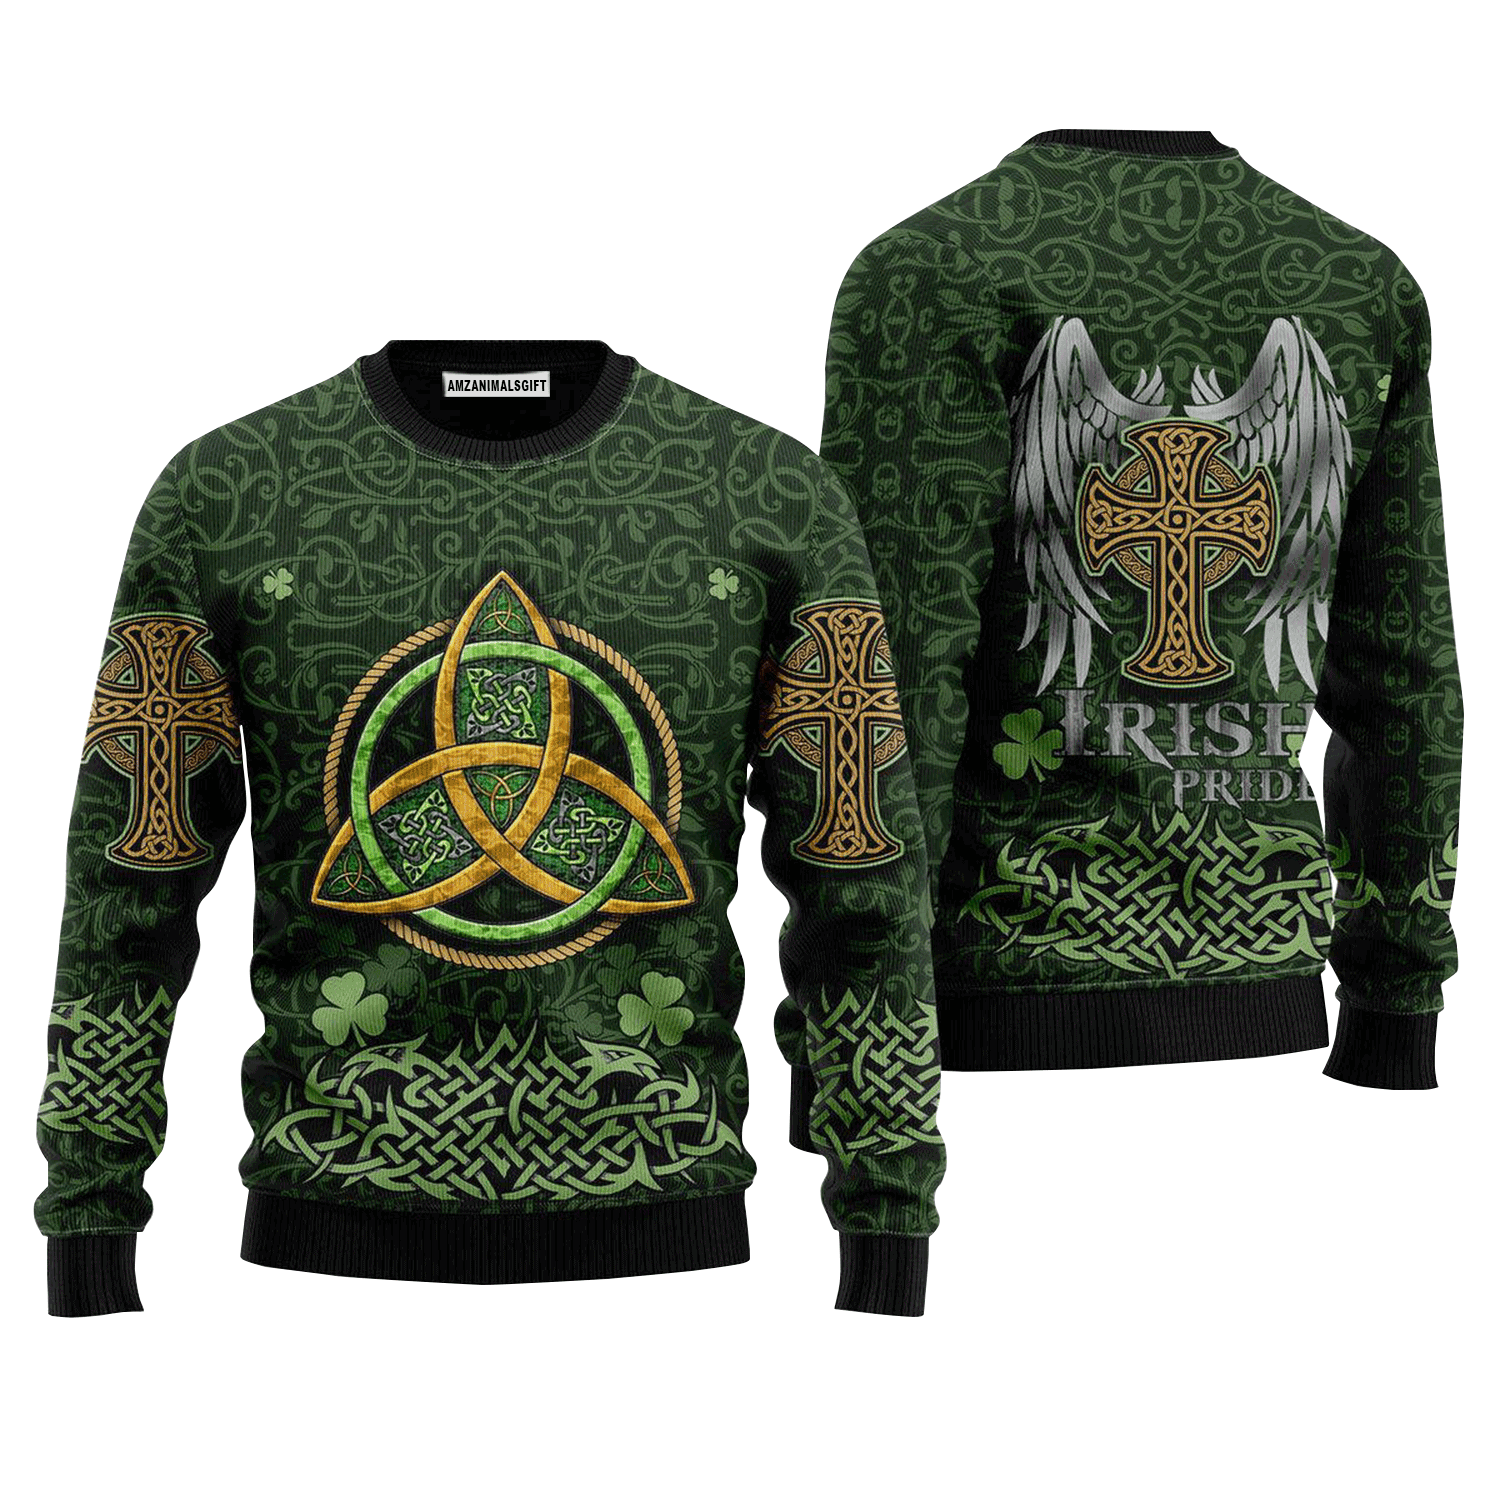 Irish Pride St Patricks Day Sweater, Ugly Sweater For Men & Women, Perfect Outfit For Christmas New Year Autumn Winter